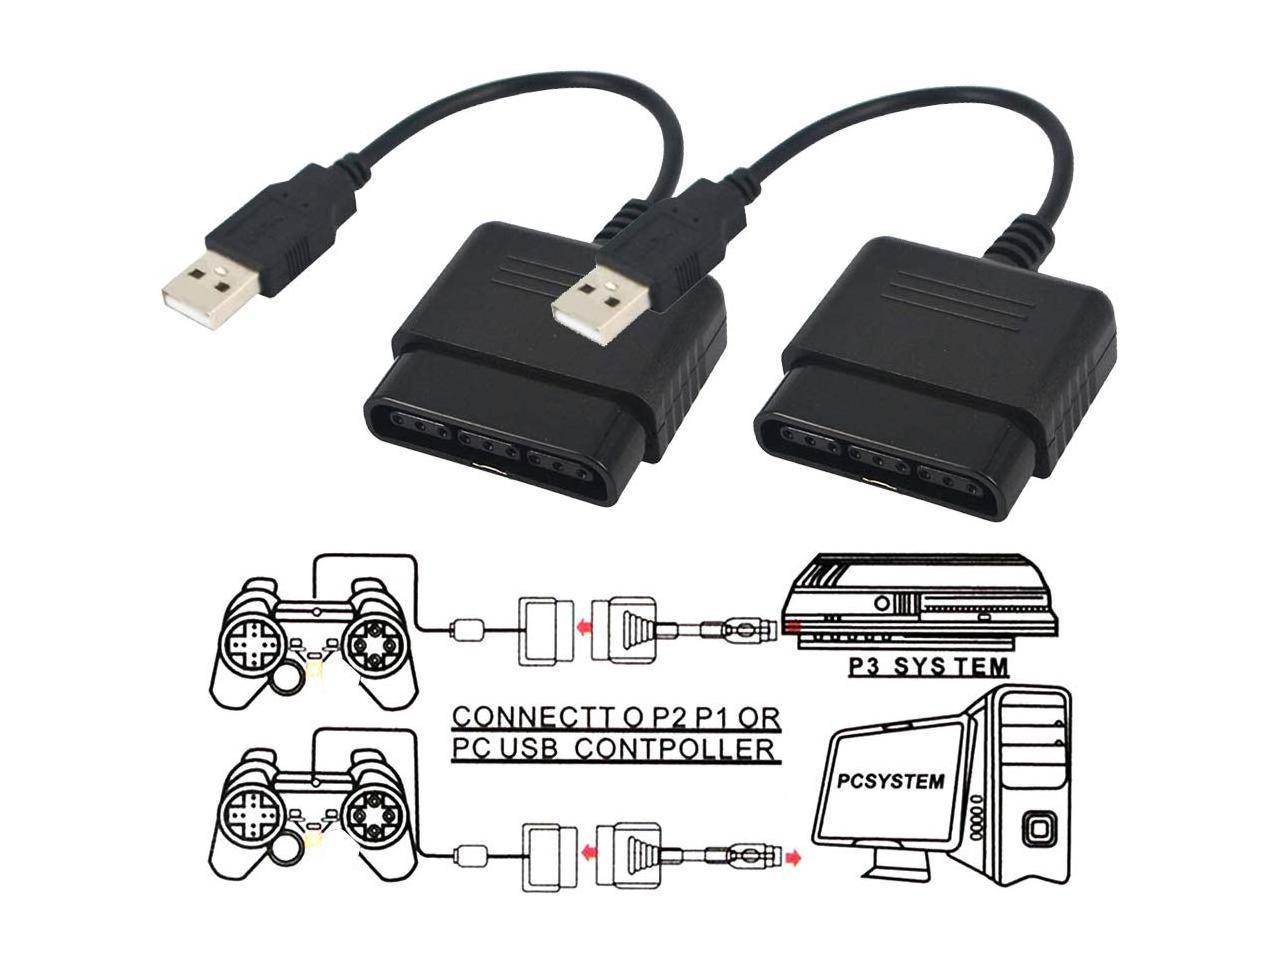 Werleo PlayStation 2 Controller to USB Adapter for PC or Playstation 3 Converter Cable for Sony DualShock PS2 PS3 Controllers - 2 Packs Newegg.com